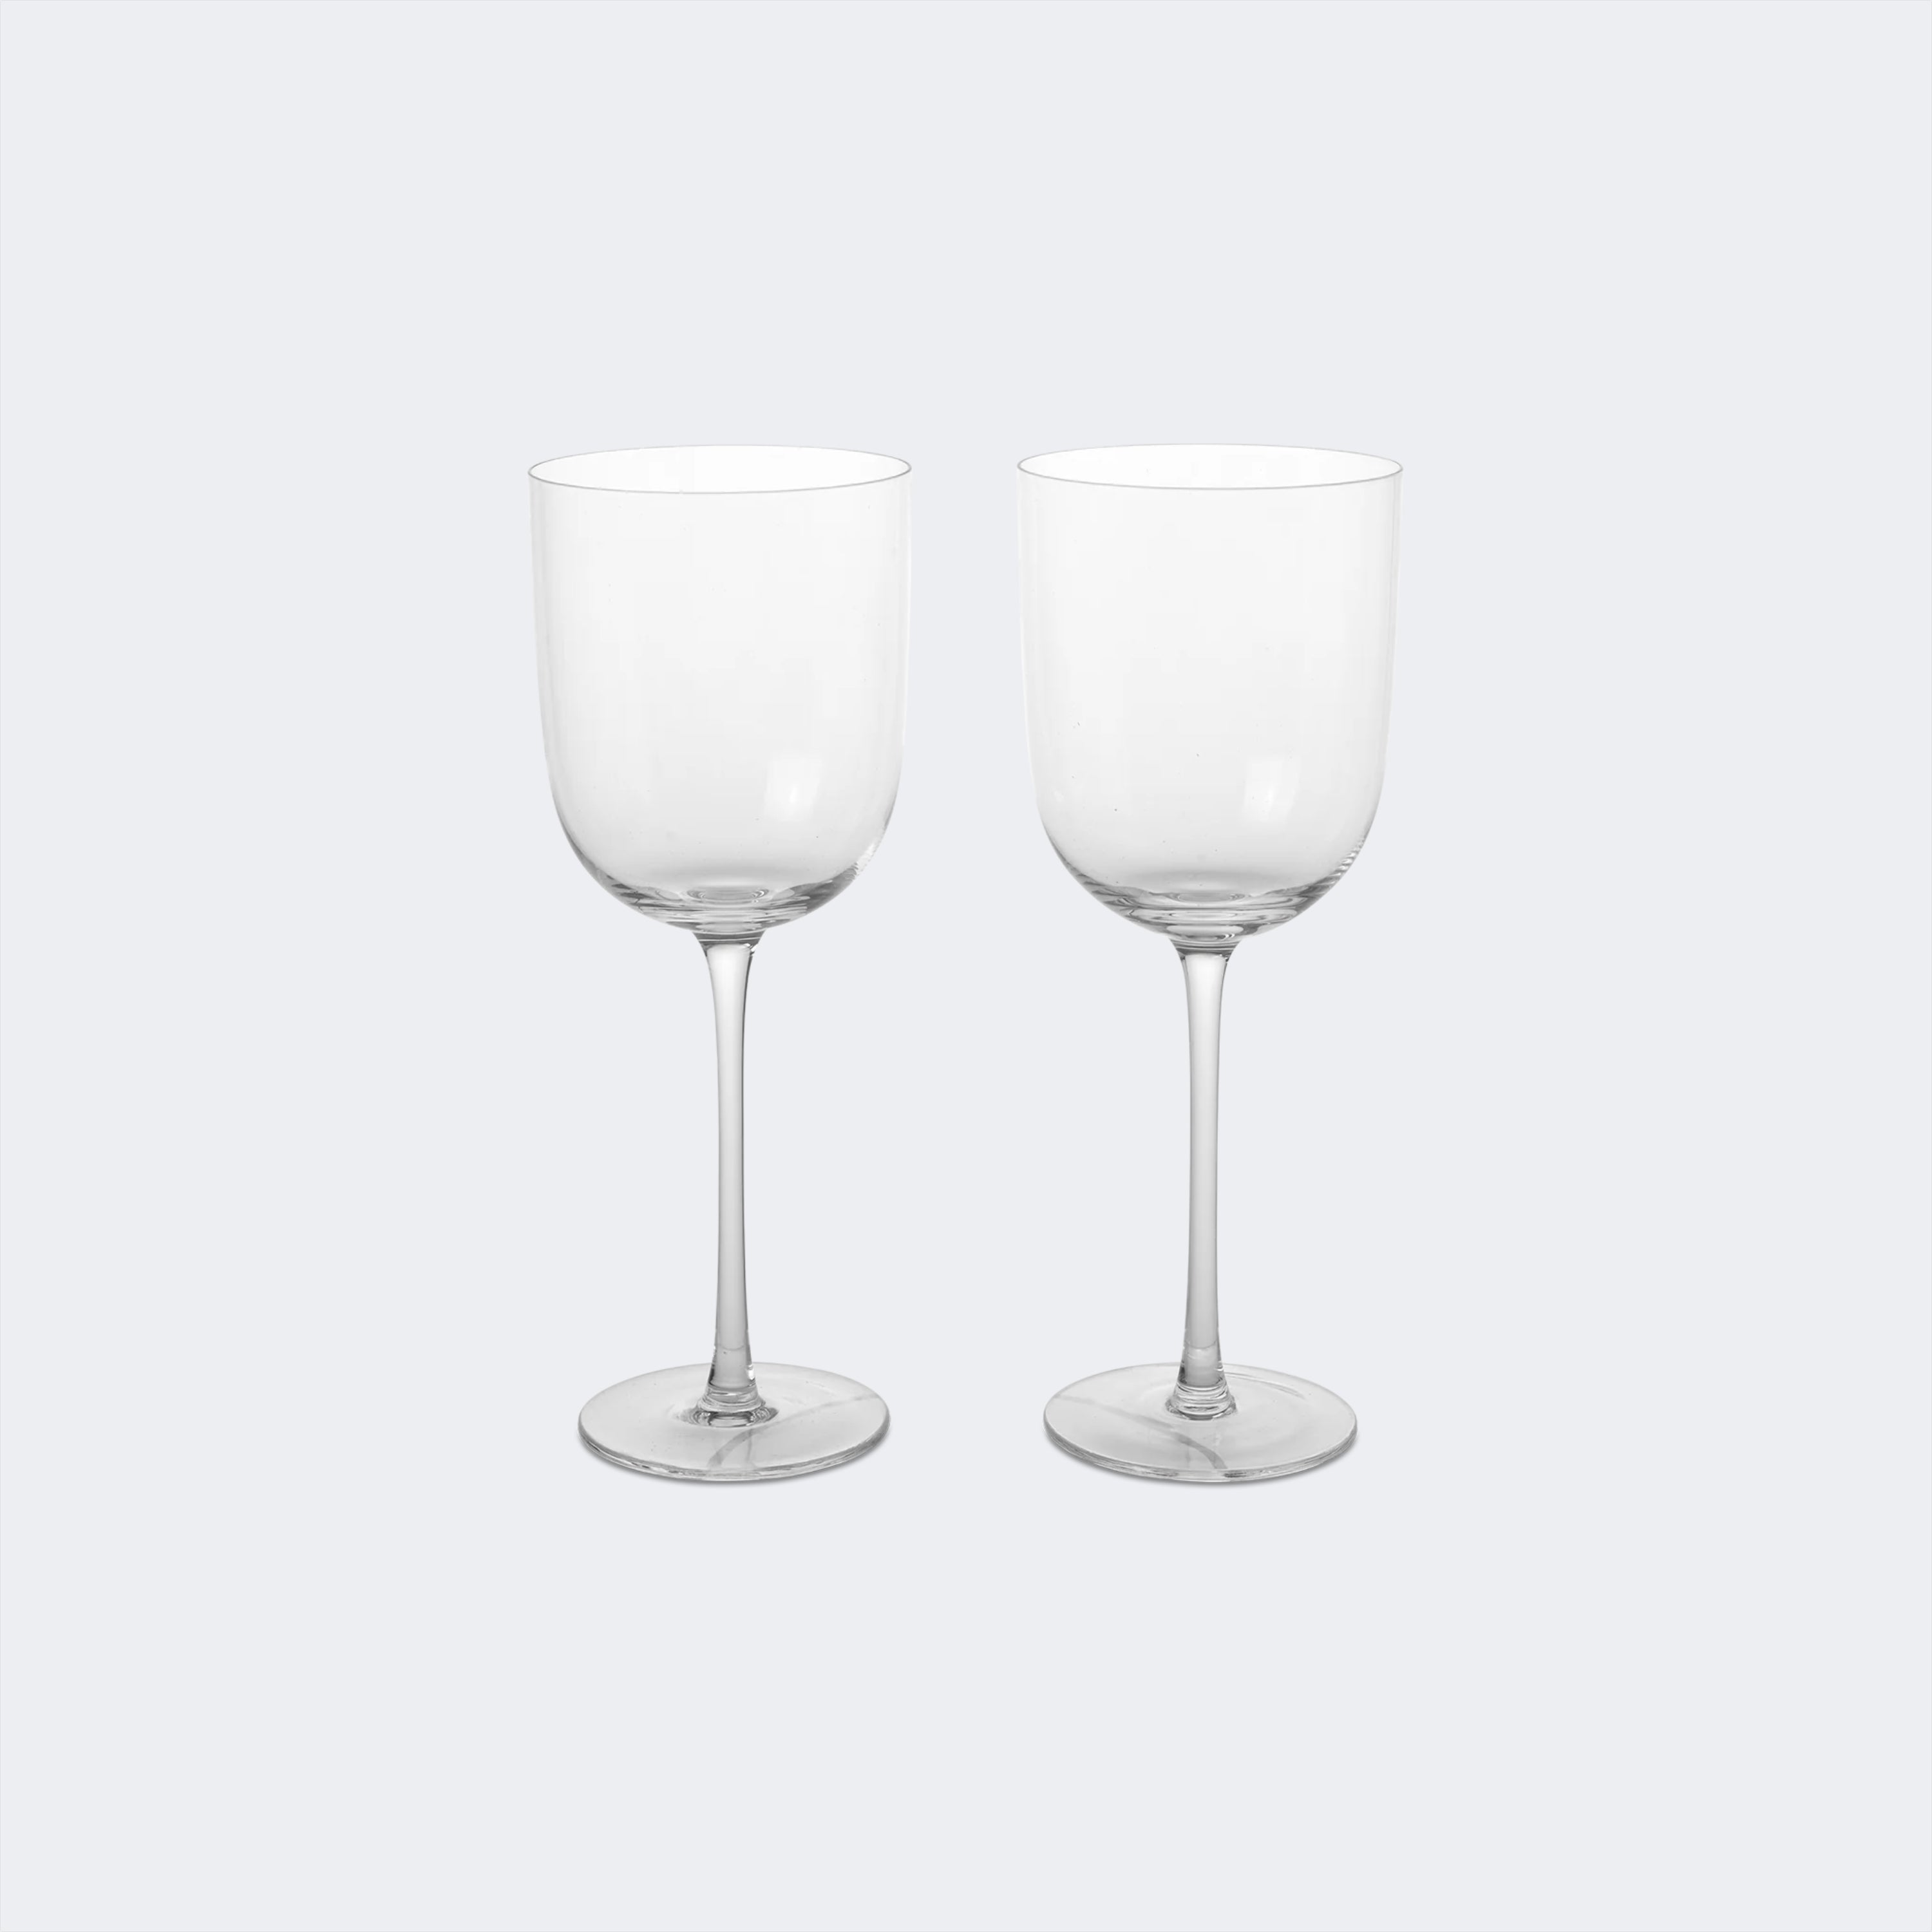 Ferm Living Host Red Wine Glasses - Set of 2 Clear - KANSO